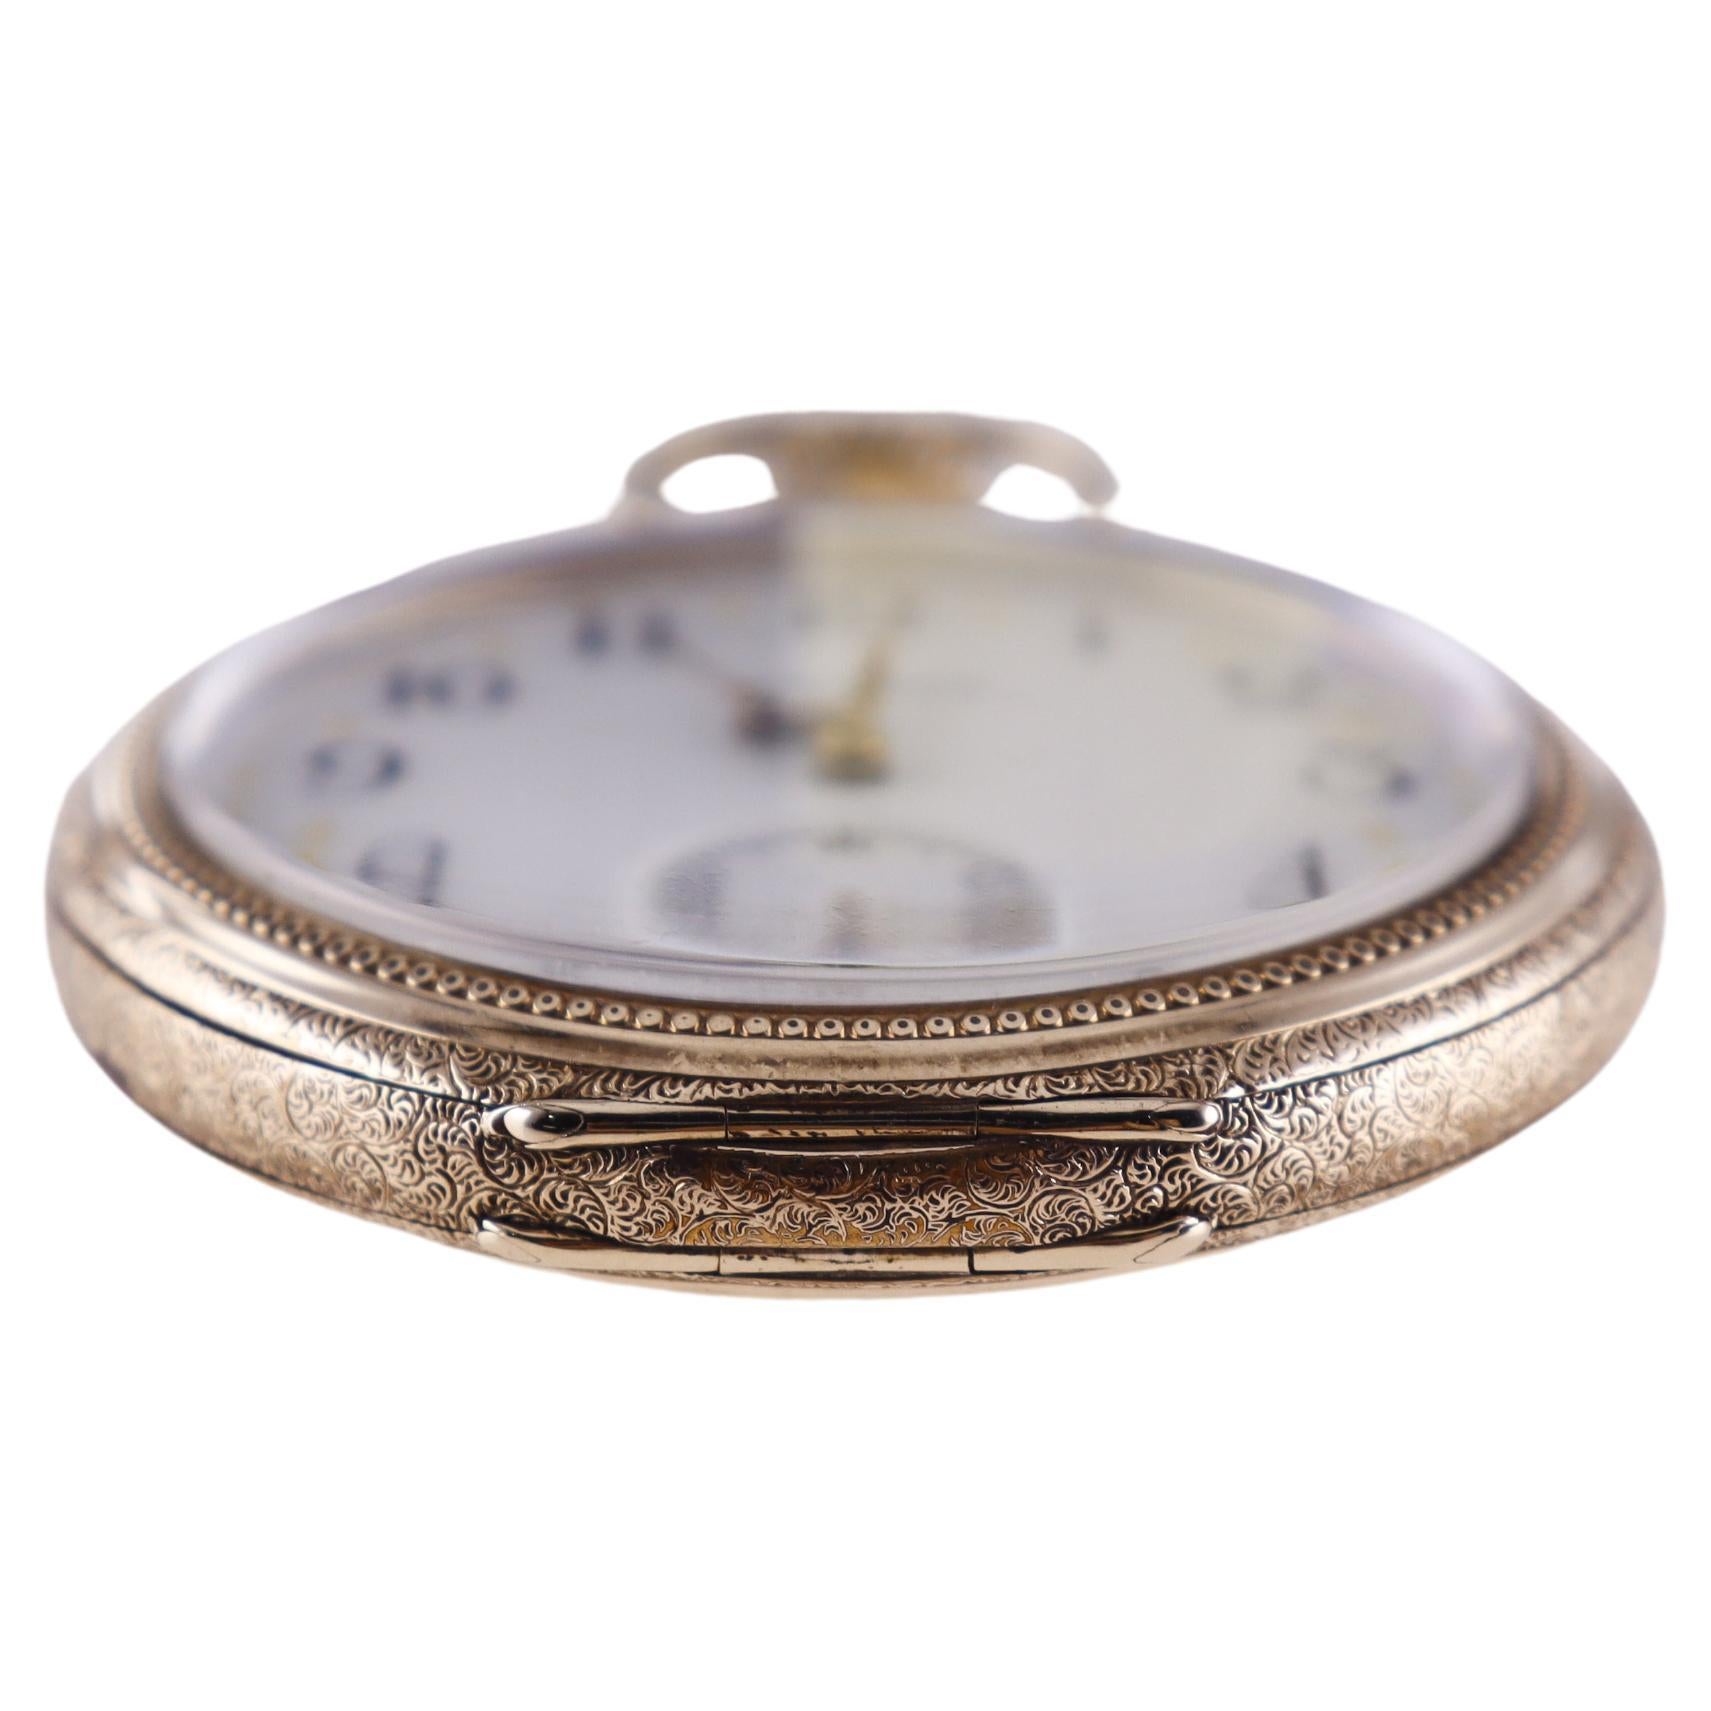 Waltham Yellow Gold Filled Open Faced Pocket Watch with Enamel Dial from 1897 In Excellent Condition For Sale In Long Beach, CA